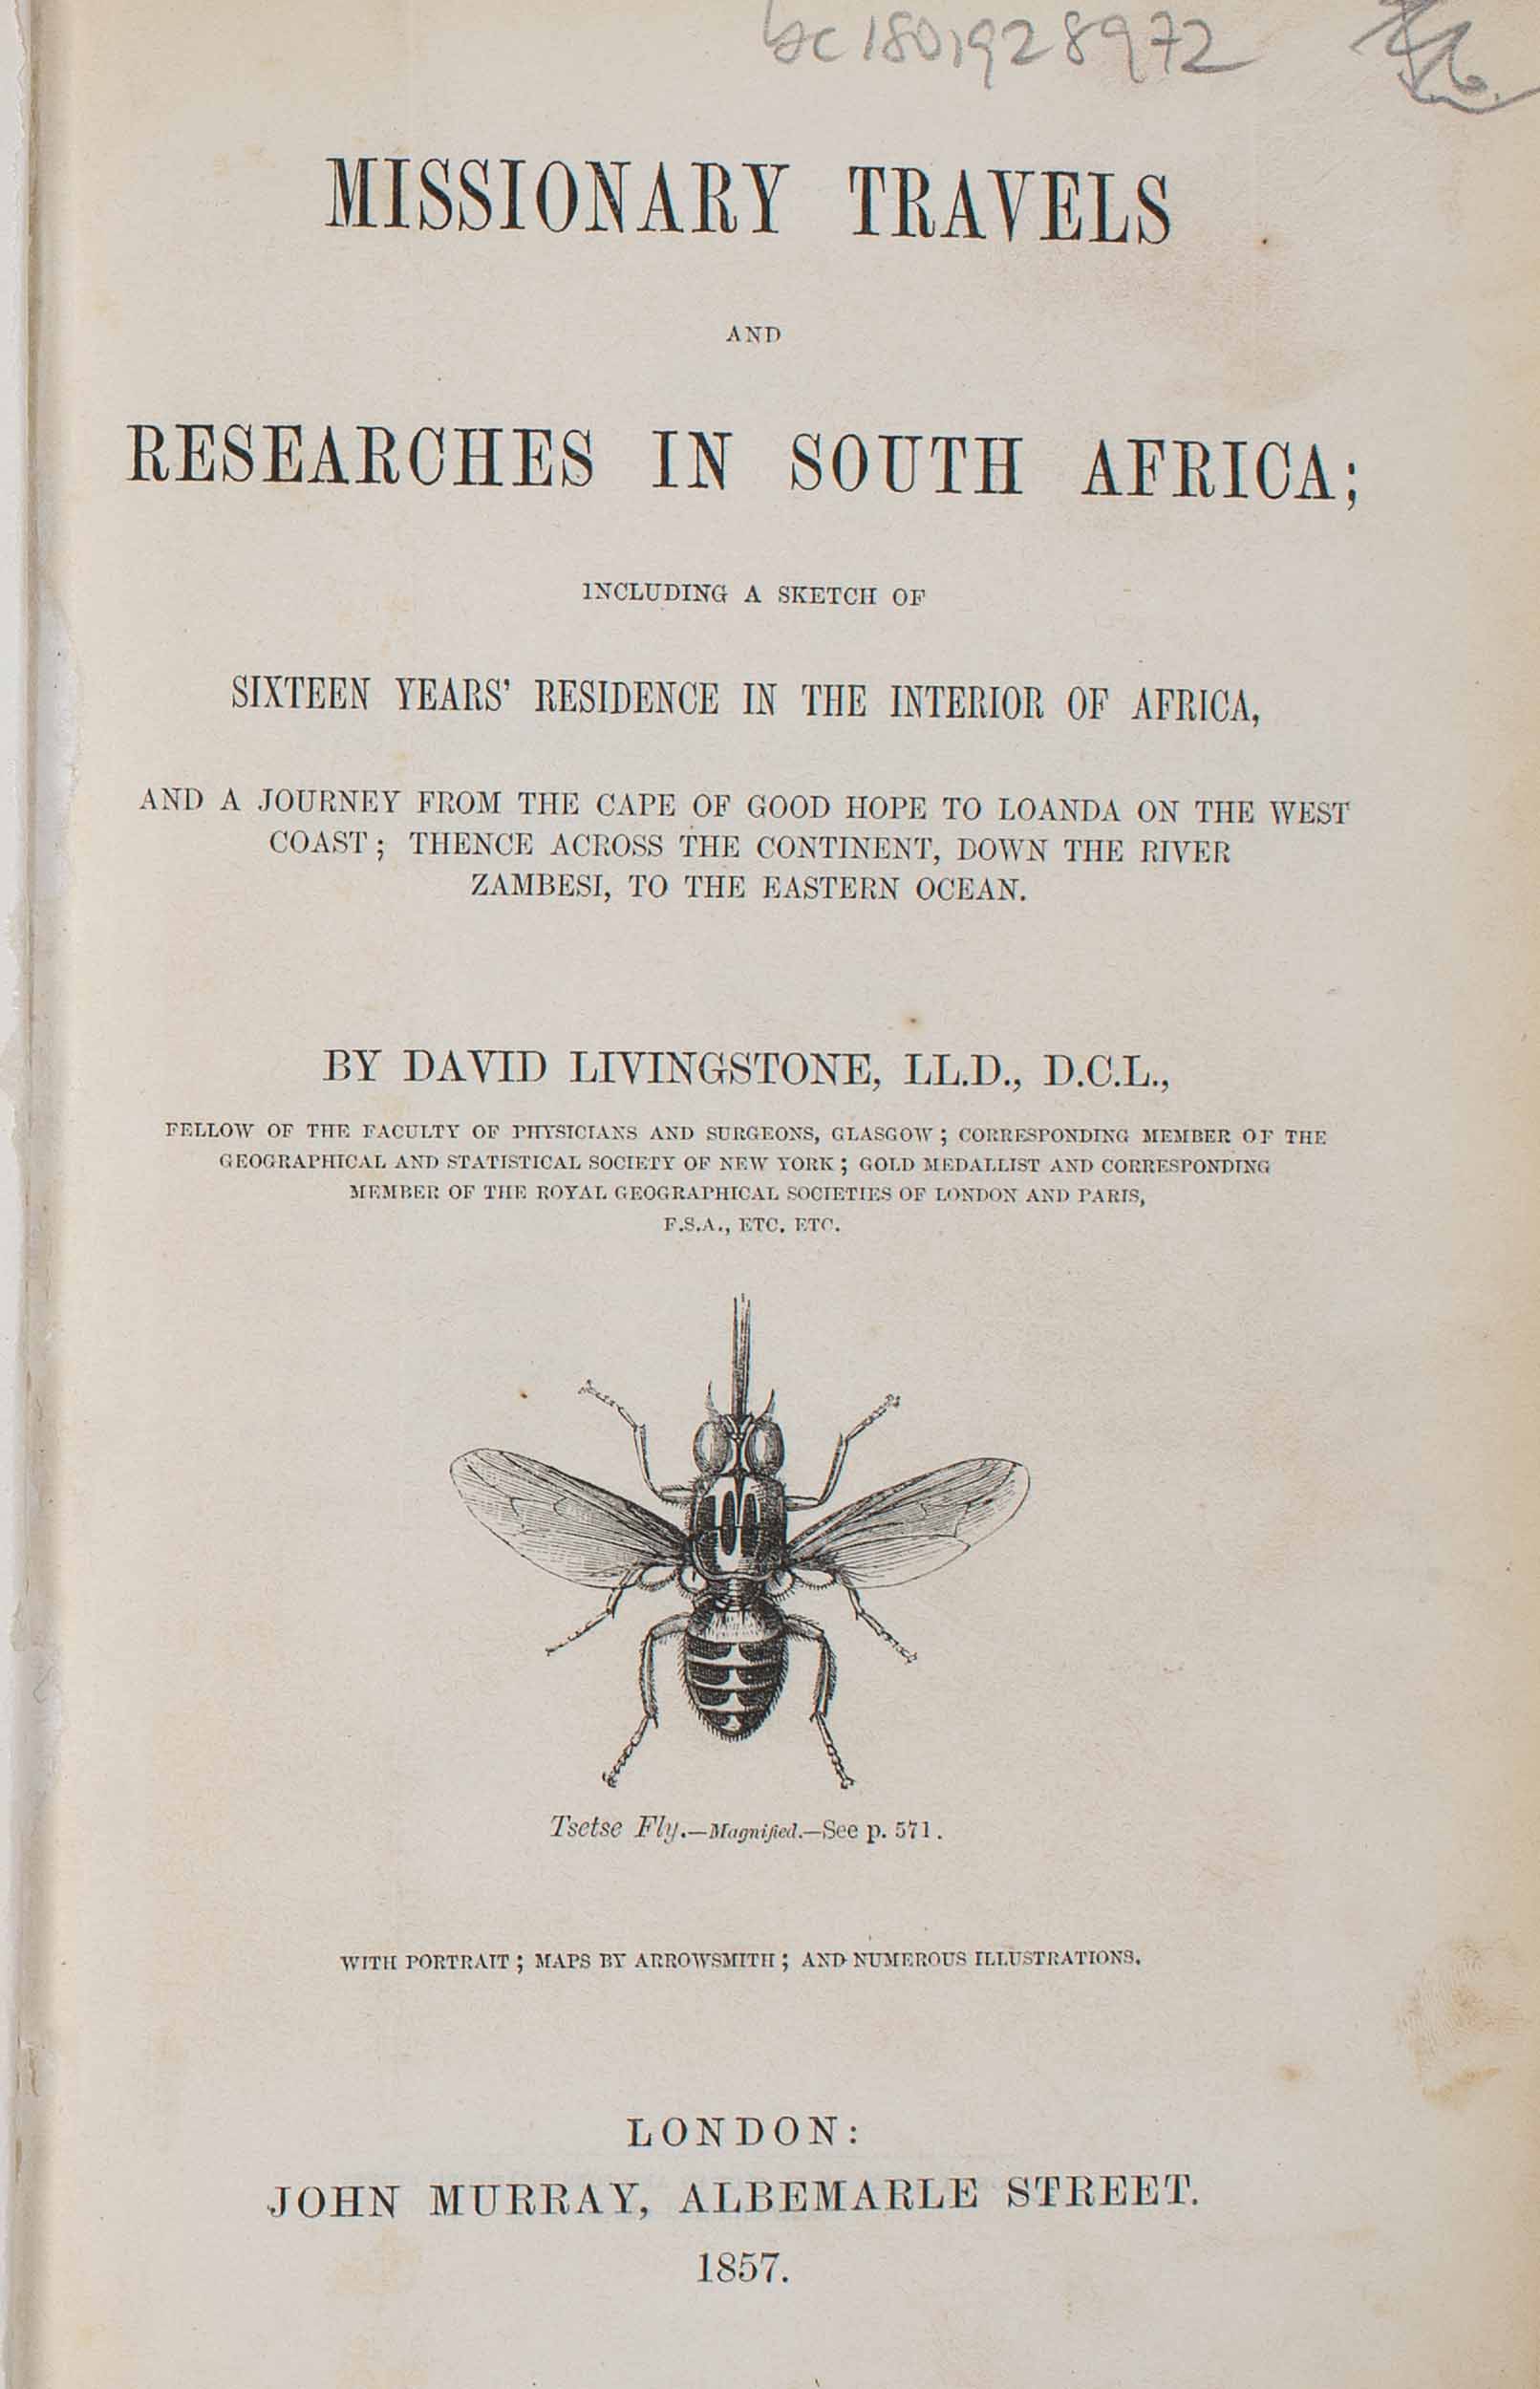 Tsetse fly, Missionary Travels (frontispiece), 1857.  Copyright Royal Geographical Society (with IBG). Used by permission for academic purposes only. For non-academic use permission, please contact the Picture Library. ().